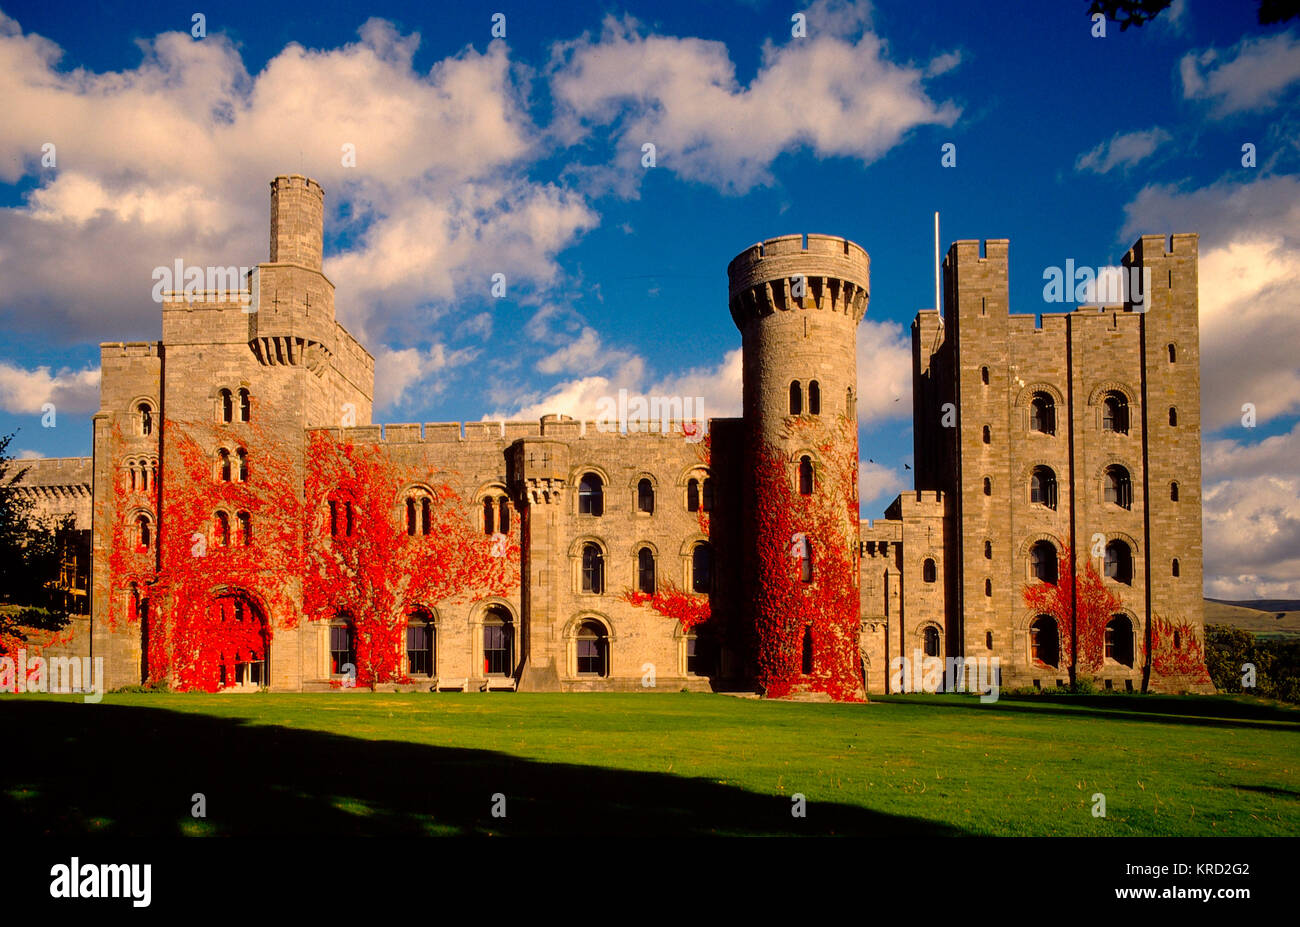 View of Penrhyn Castle, near Bangor, Gwynedd, North Wales, with bright red ivy growing on the walls.       Date: 2008 Stock Photo